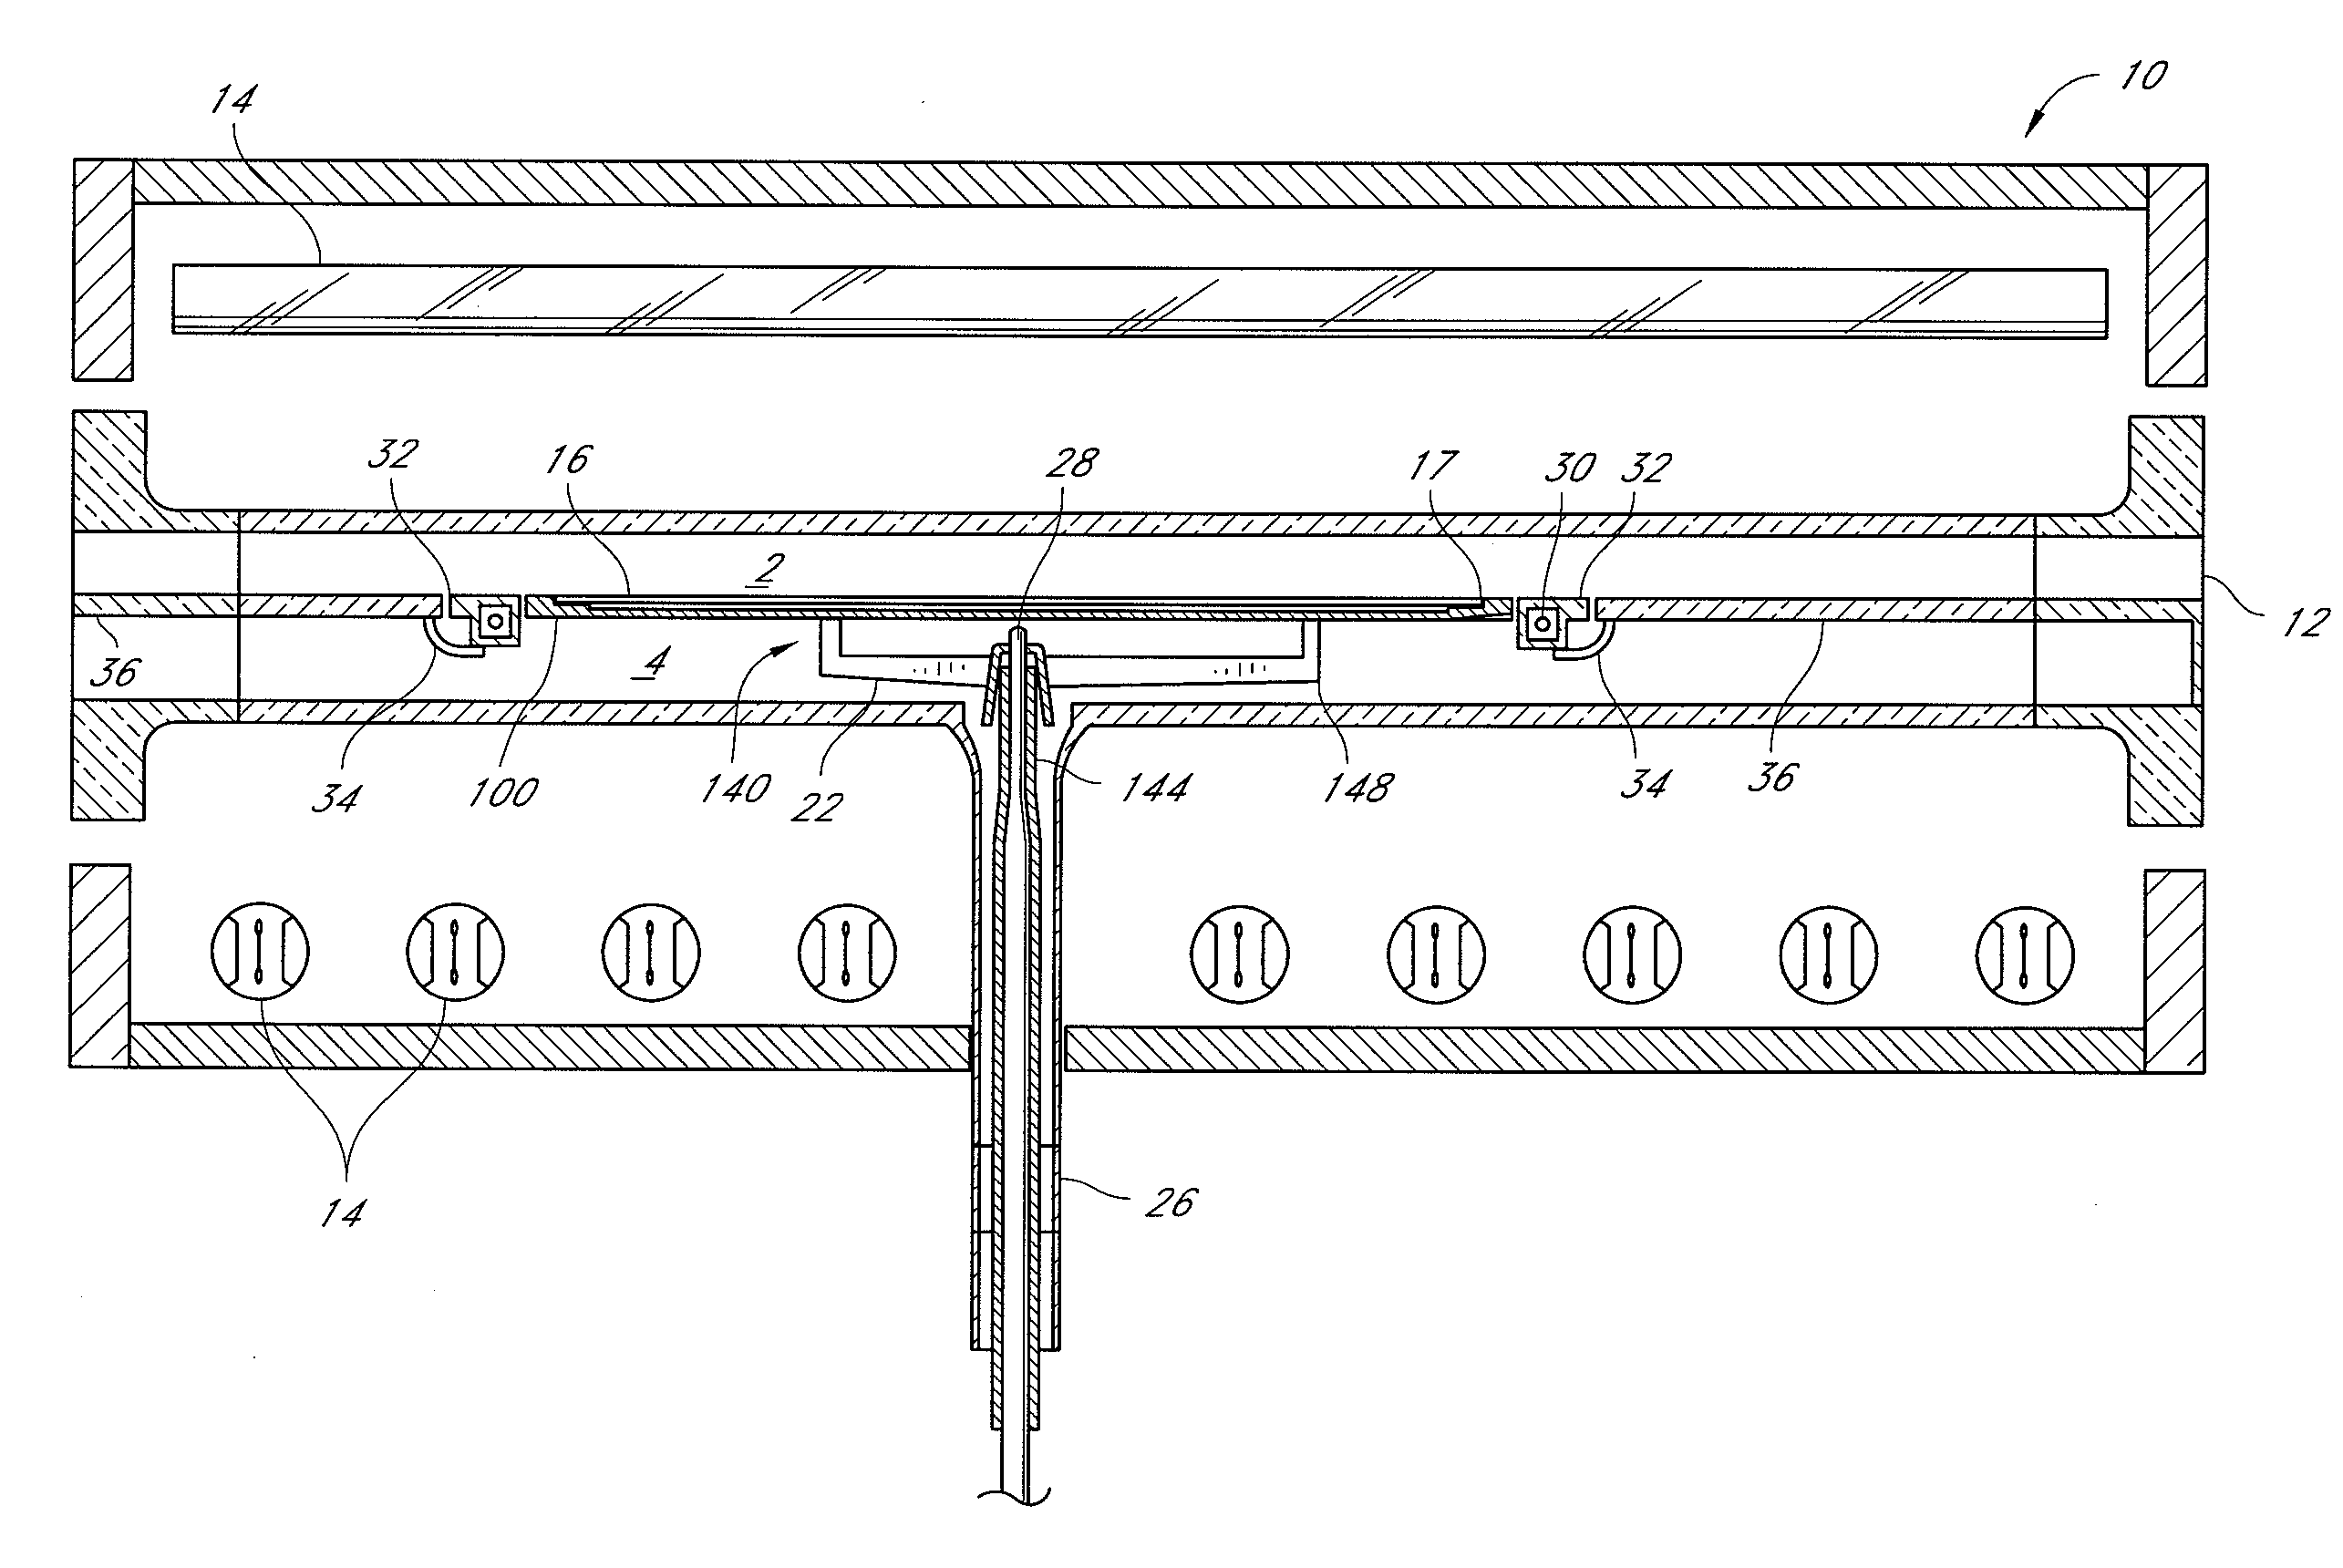 Porous substrate holder with thinned portions